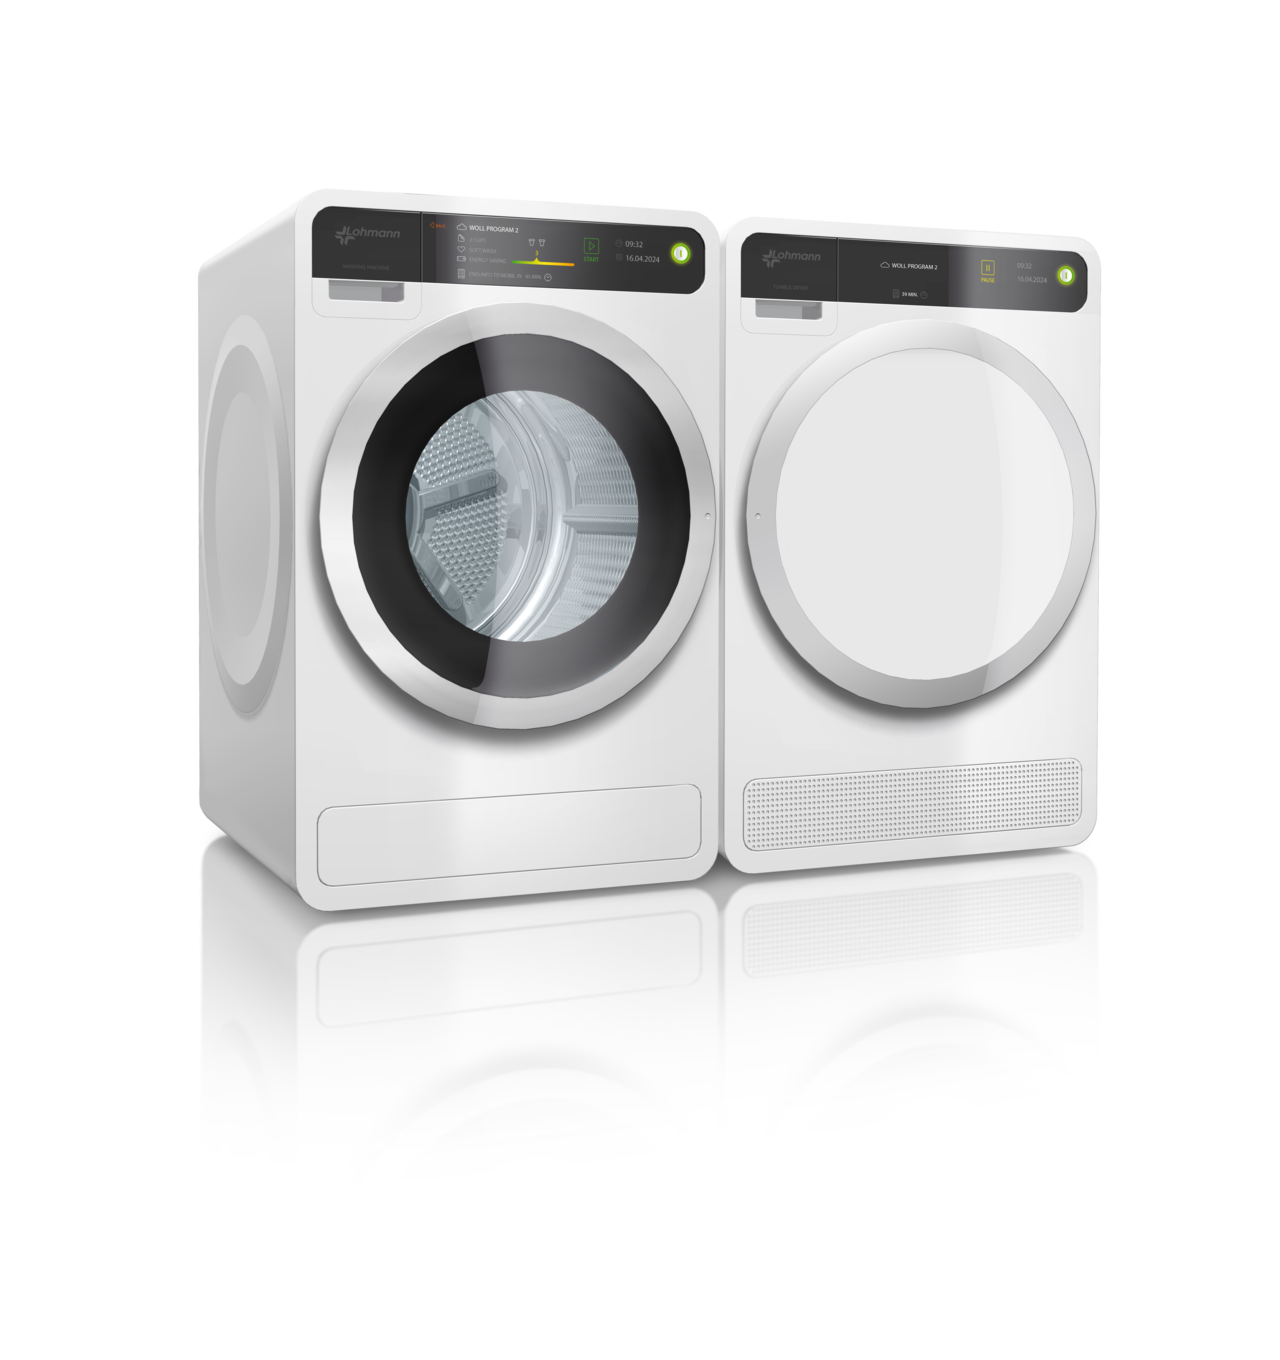 CG_Consumer_Laundry_Overview_PNG_1280 (RGB).png